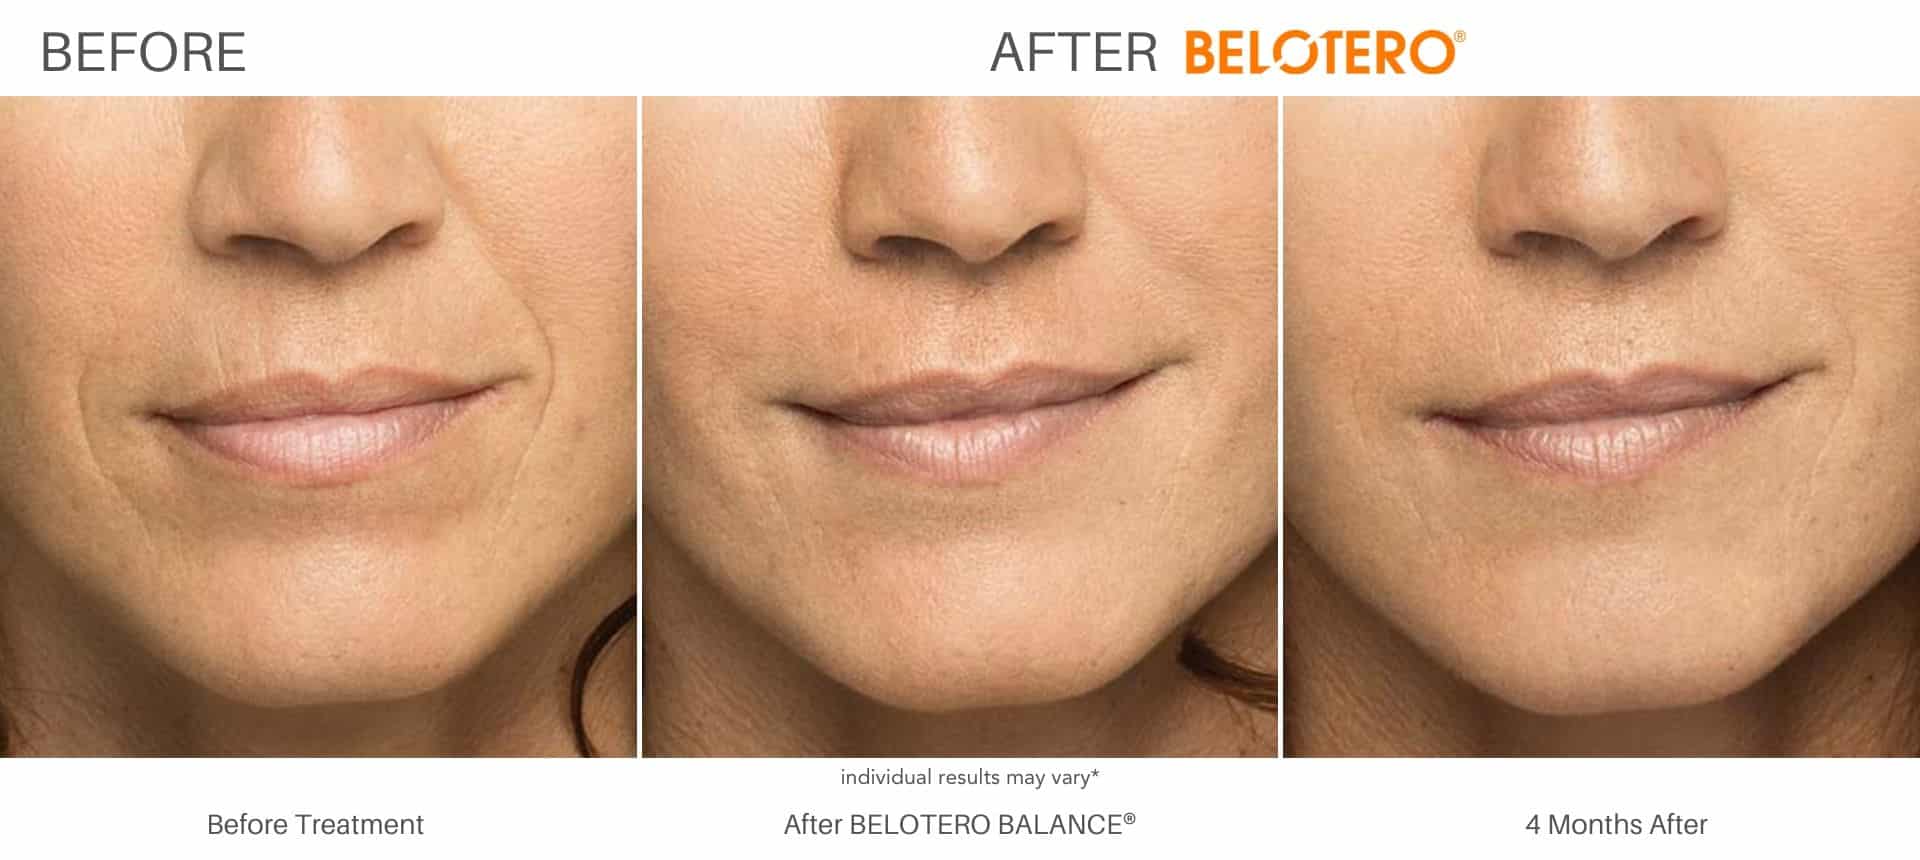 Belotero before and after results in Los Angeles, CA at Sculpt DTLA.